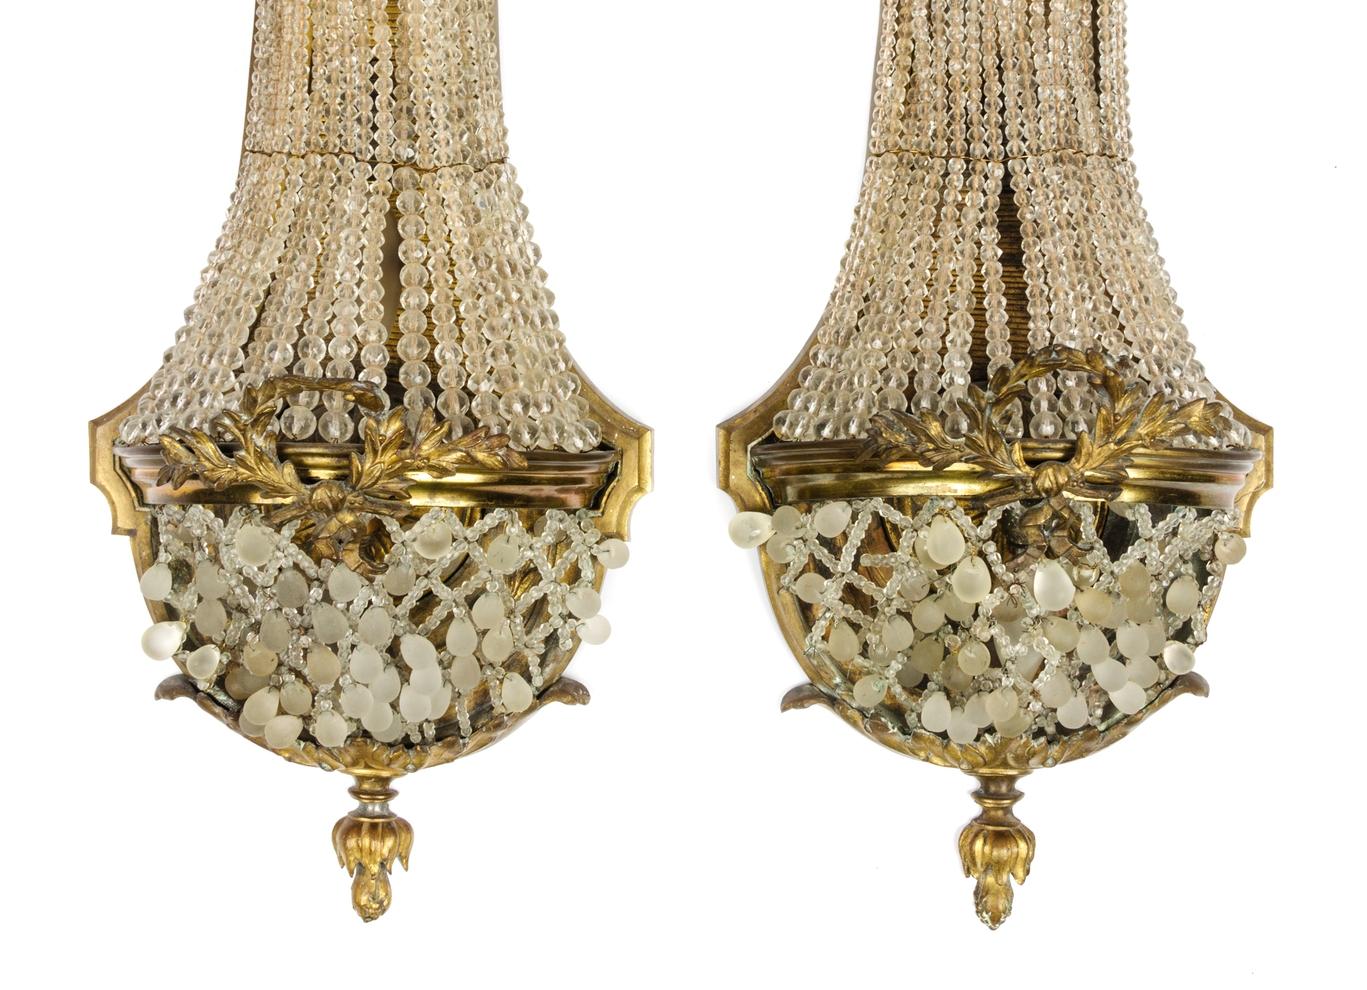 Pair of gilded and chased bronze balloon-shaped sconces with glass bead decorations. The upper part is decorated with ribbon bows and the central part is decorated with laurel branches. Good condition, light wear of gilding, stamp with